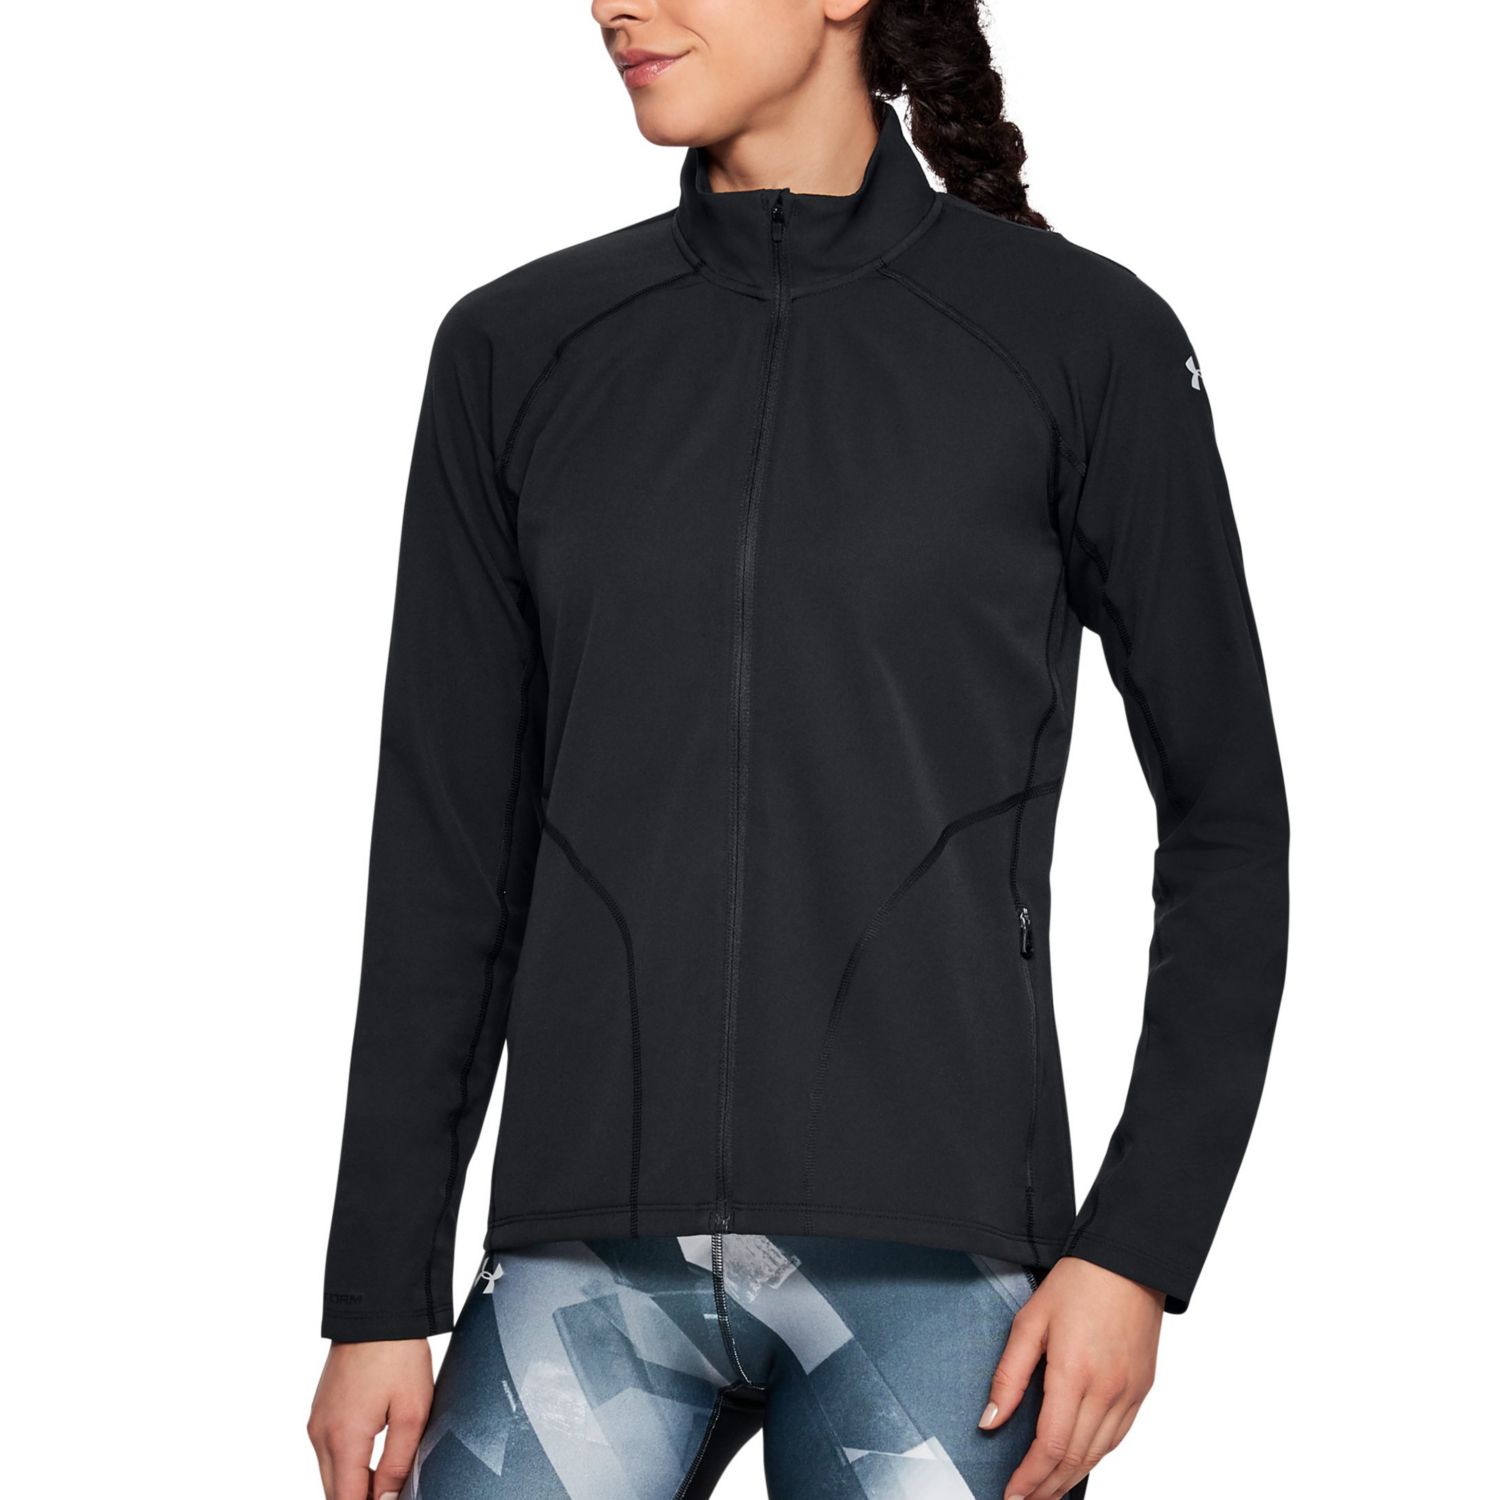 under armour storm out & back jacket